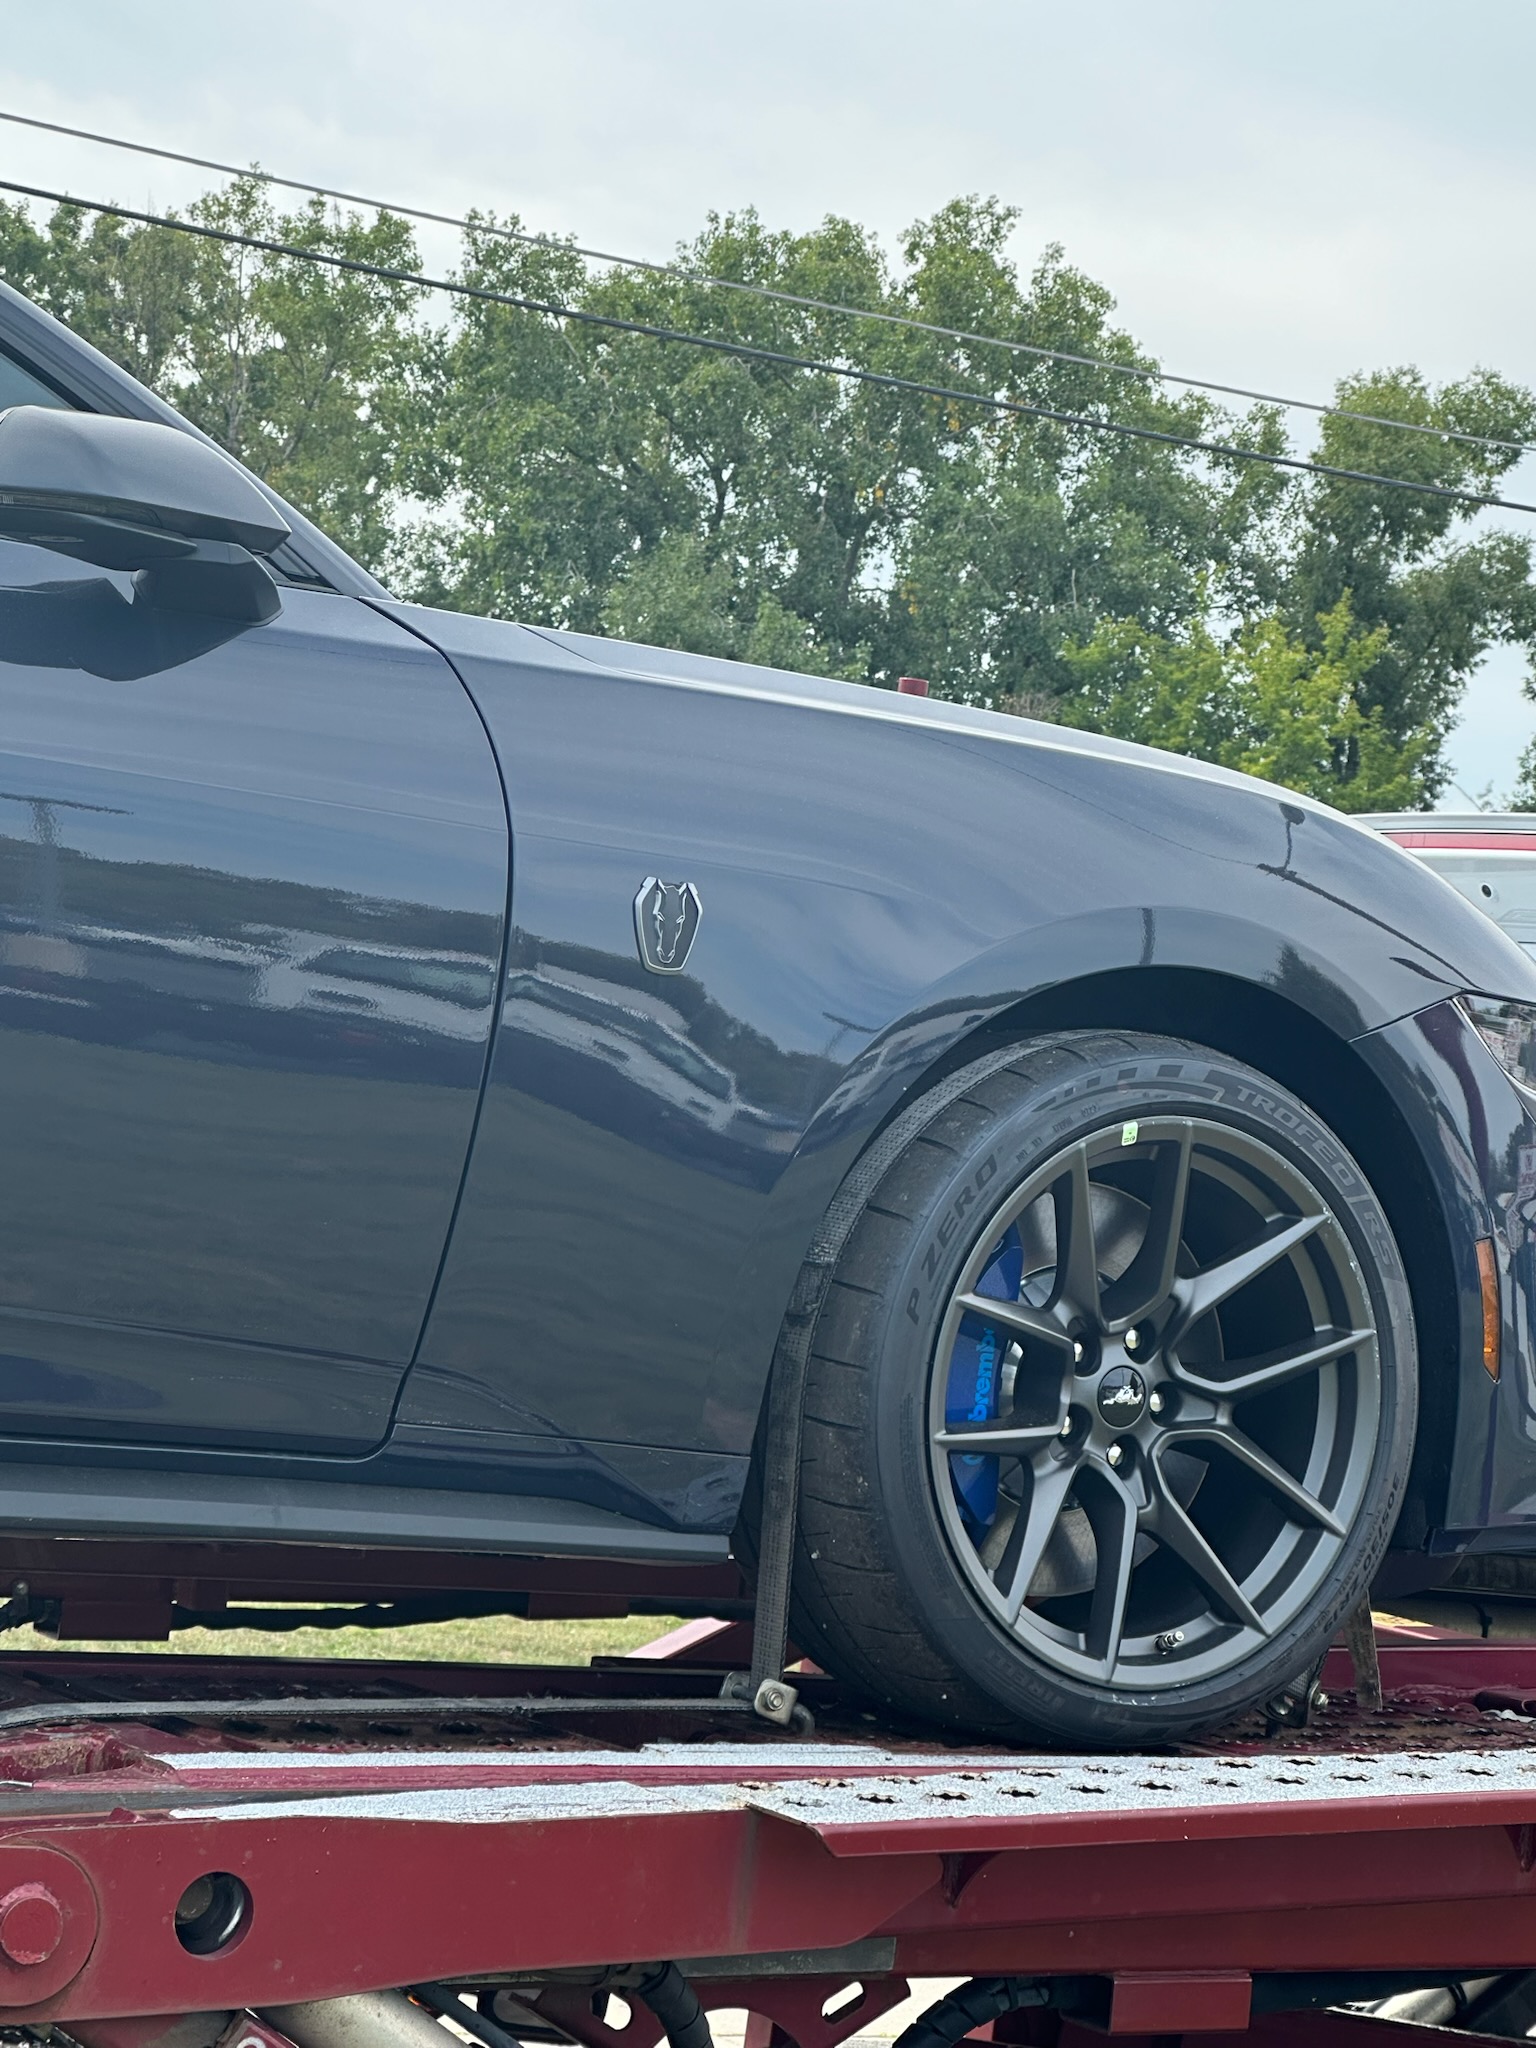 S650 Mustang Delivery Pics & Video: Pyroguy's Blue Ember Dark Horse, HP 63964